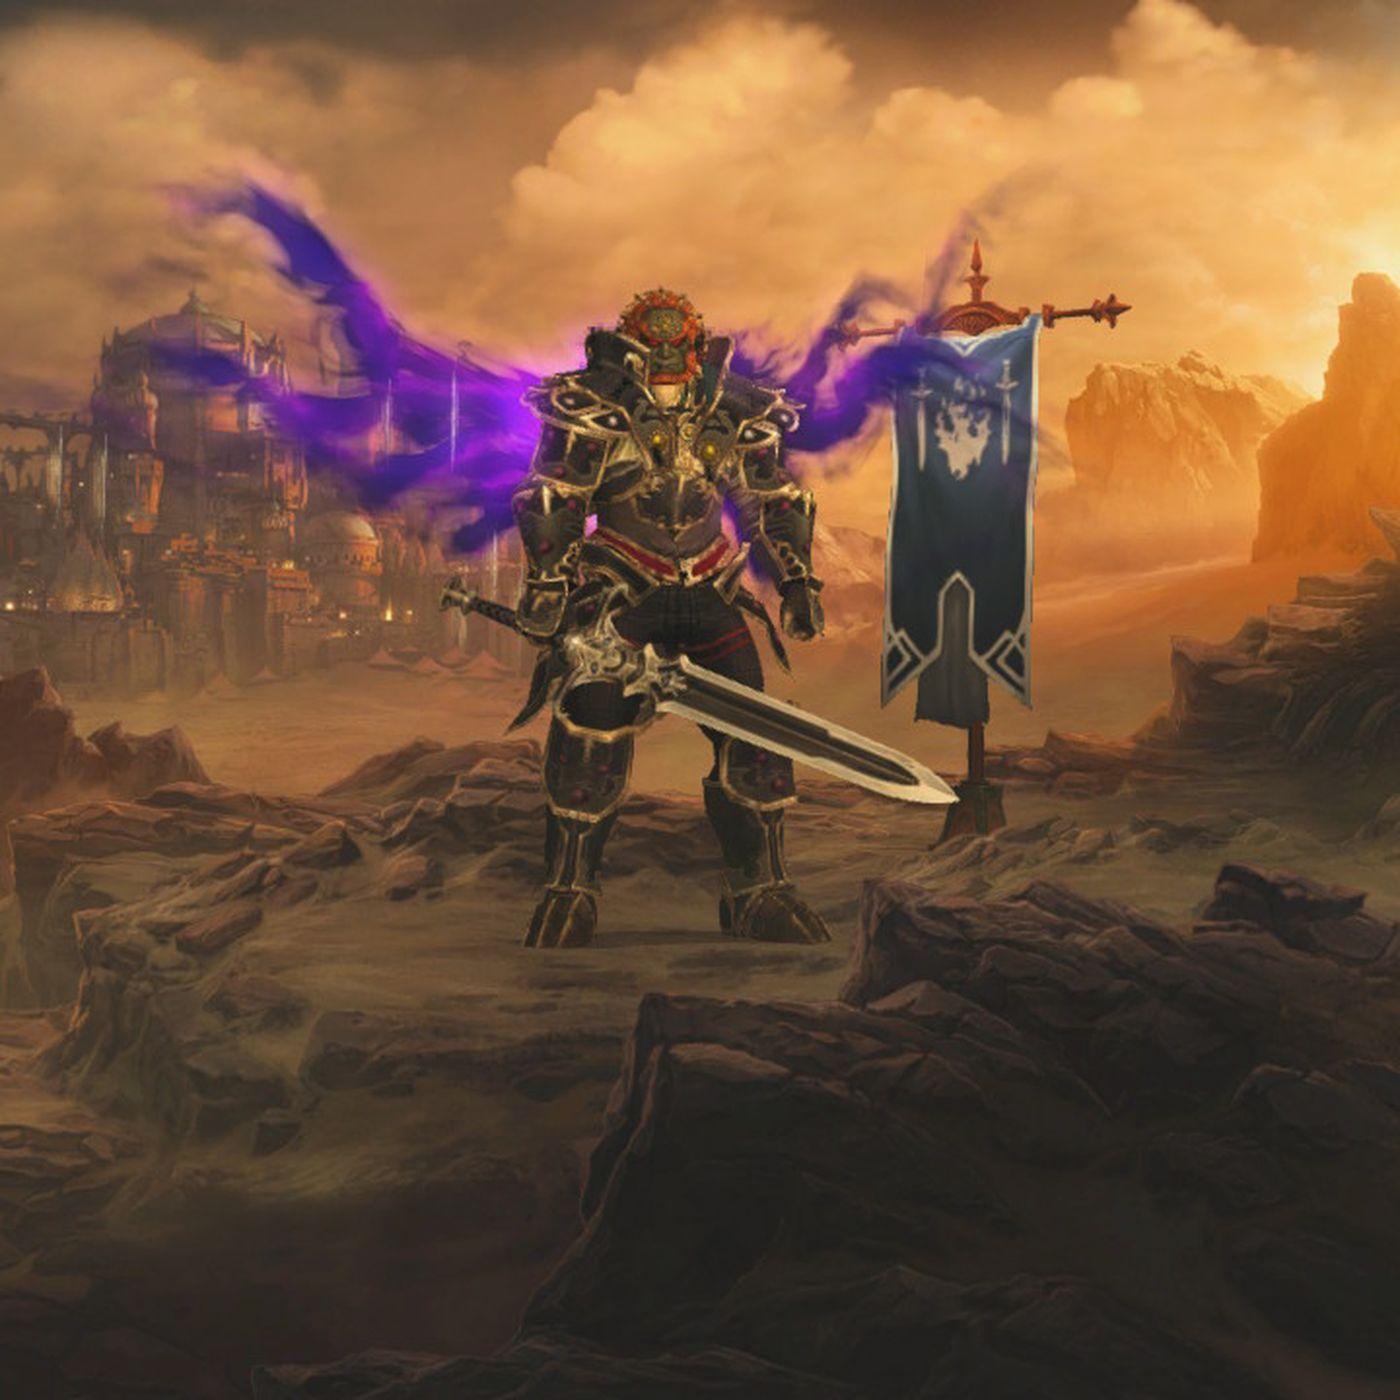 Diablo III is coming to the Nintendo Switch later this fall